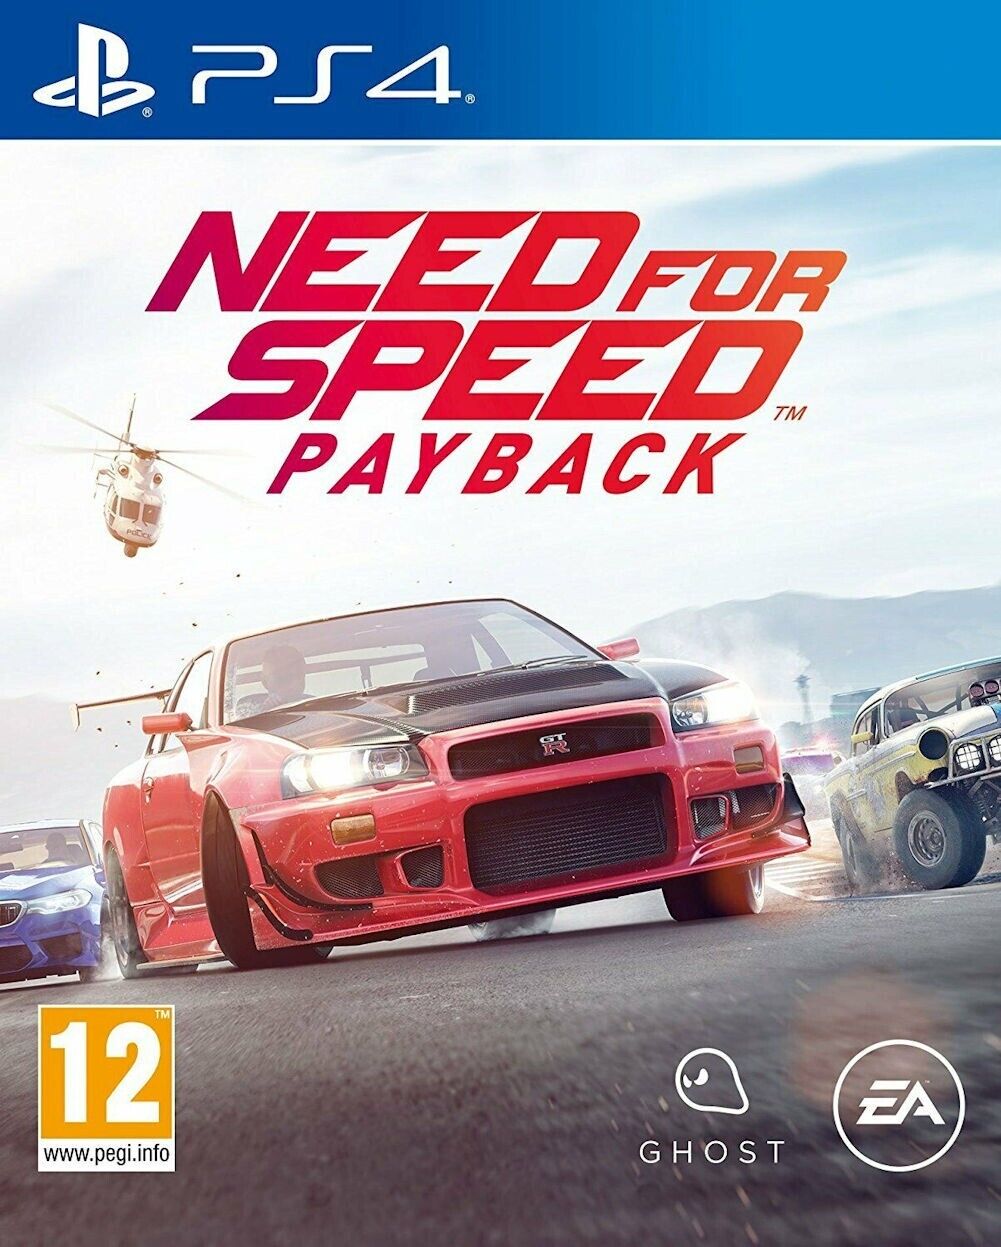 Need For Speed Payback PlayStation 4 Game.